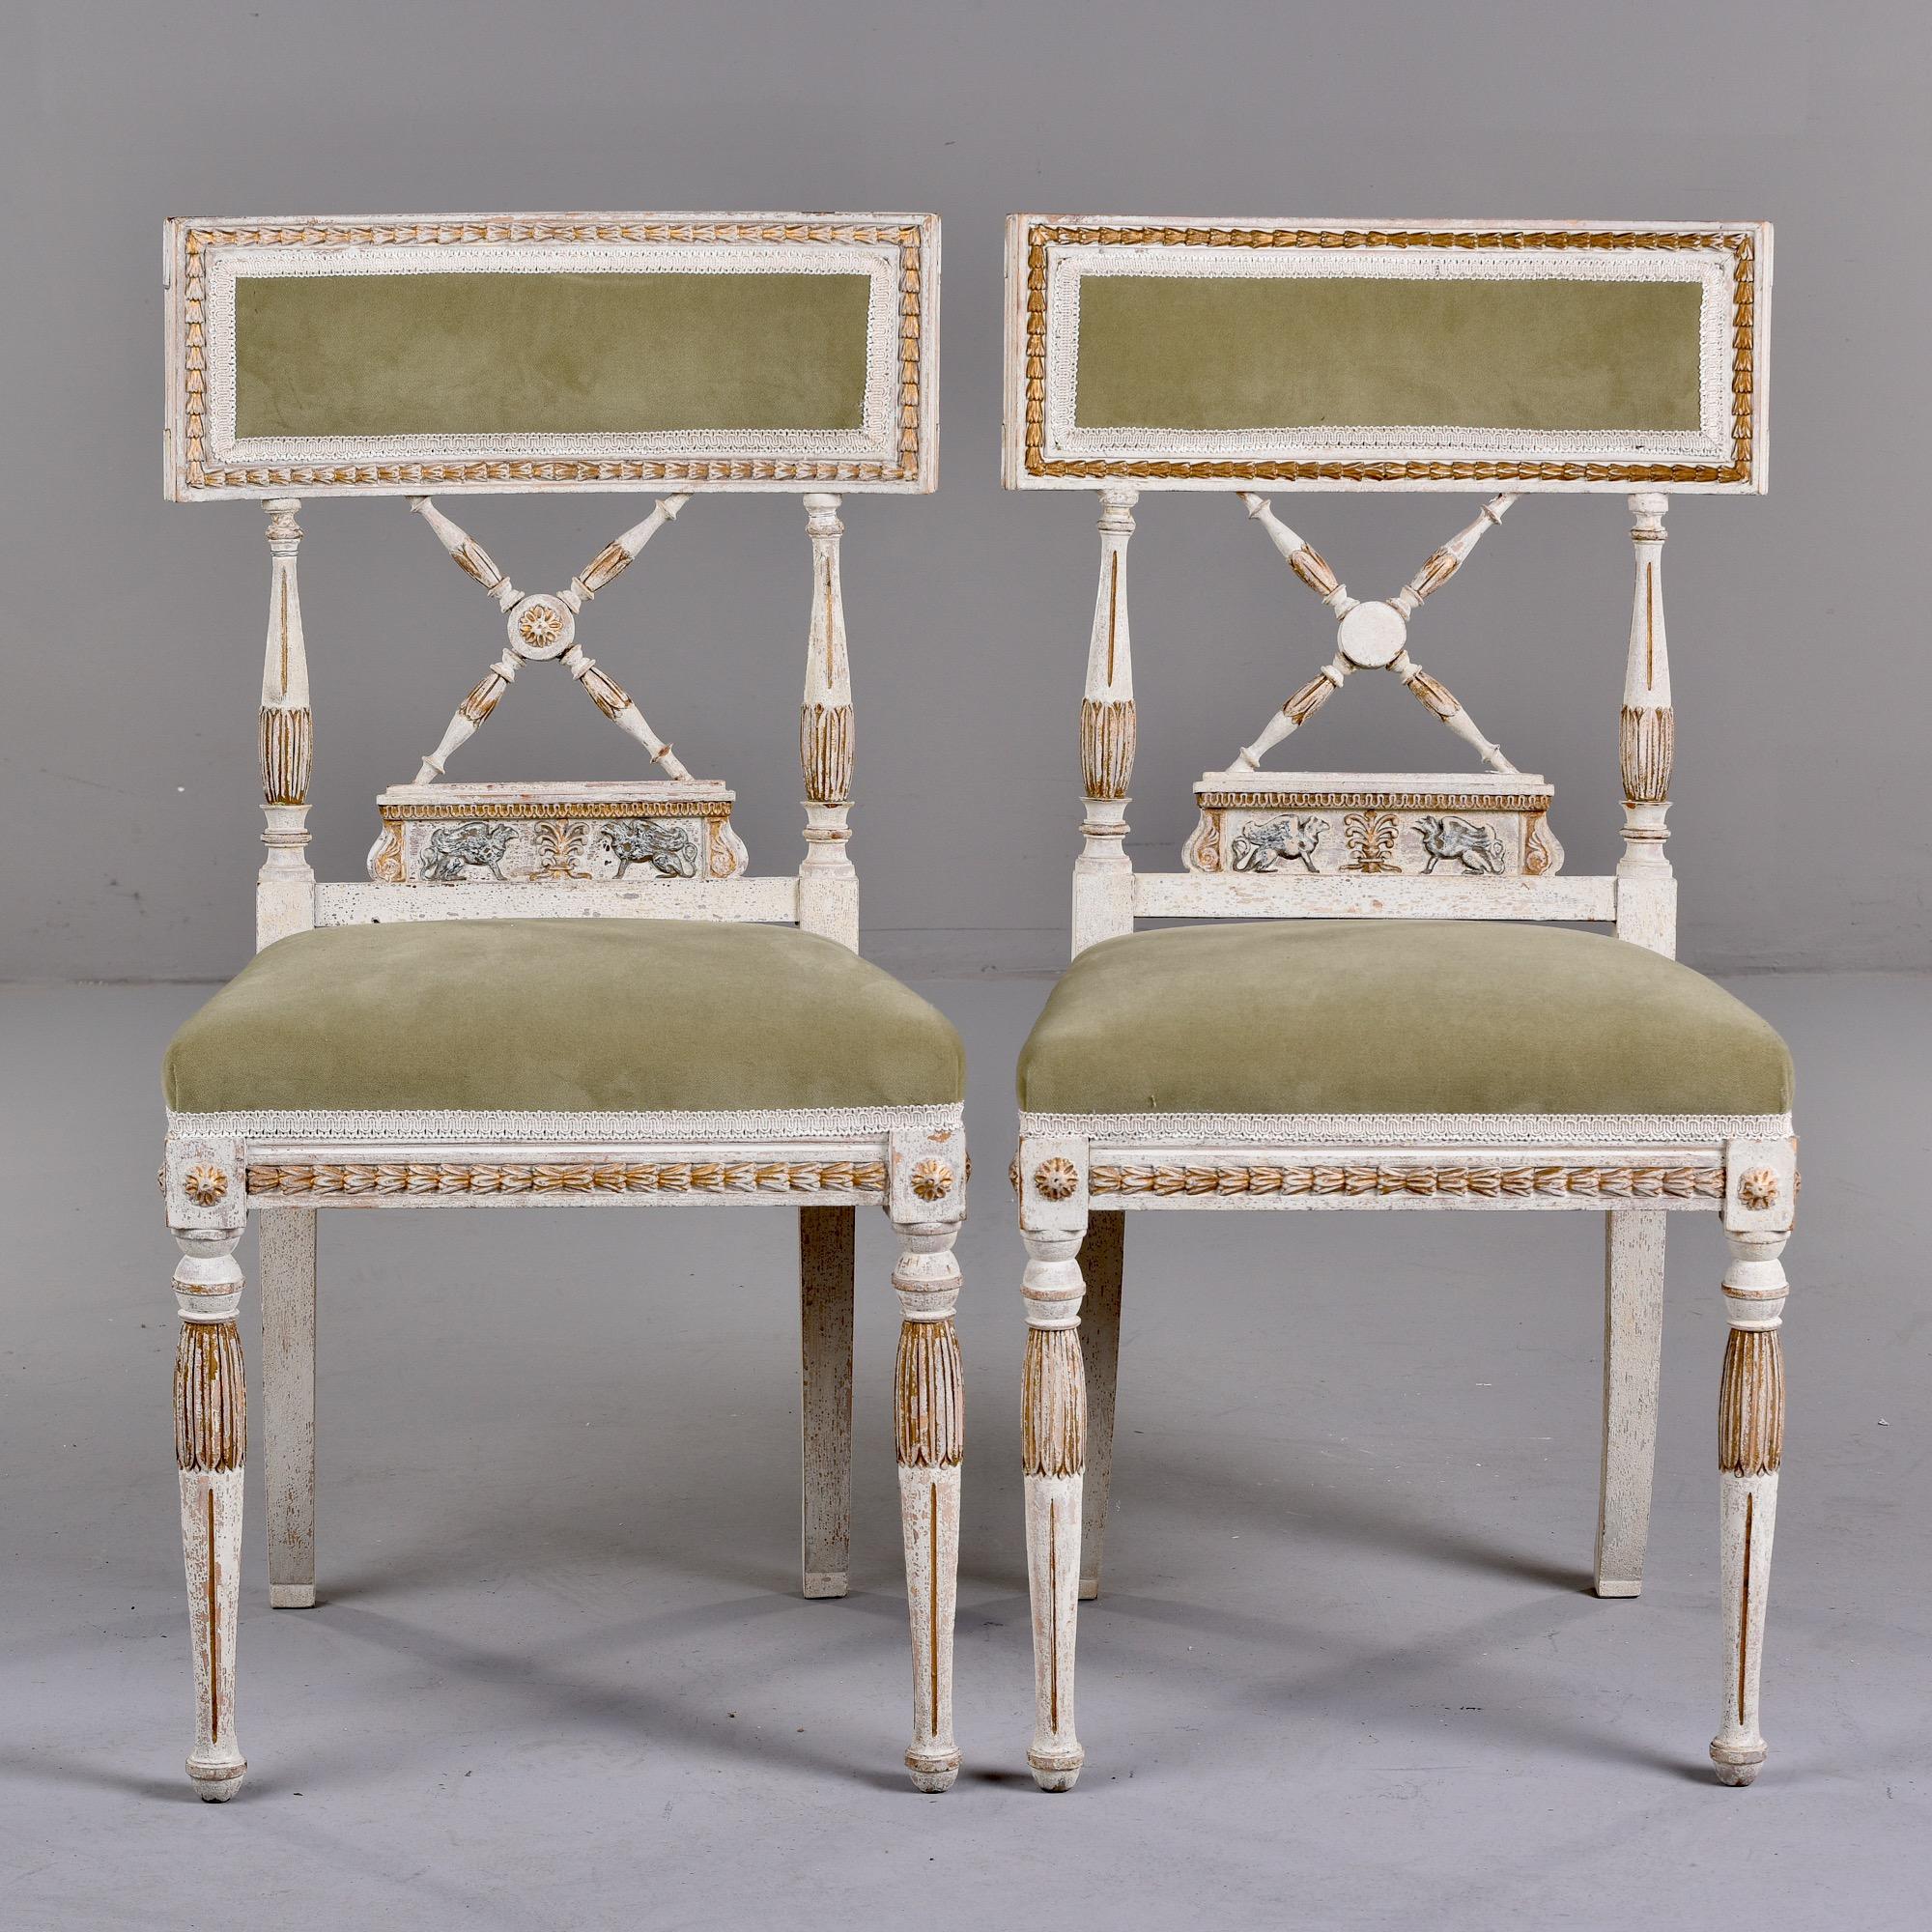 20th Century Set of 6 Swedish Gustavian Style Painted Chairs with New Upholstery